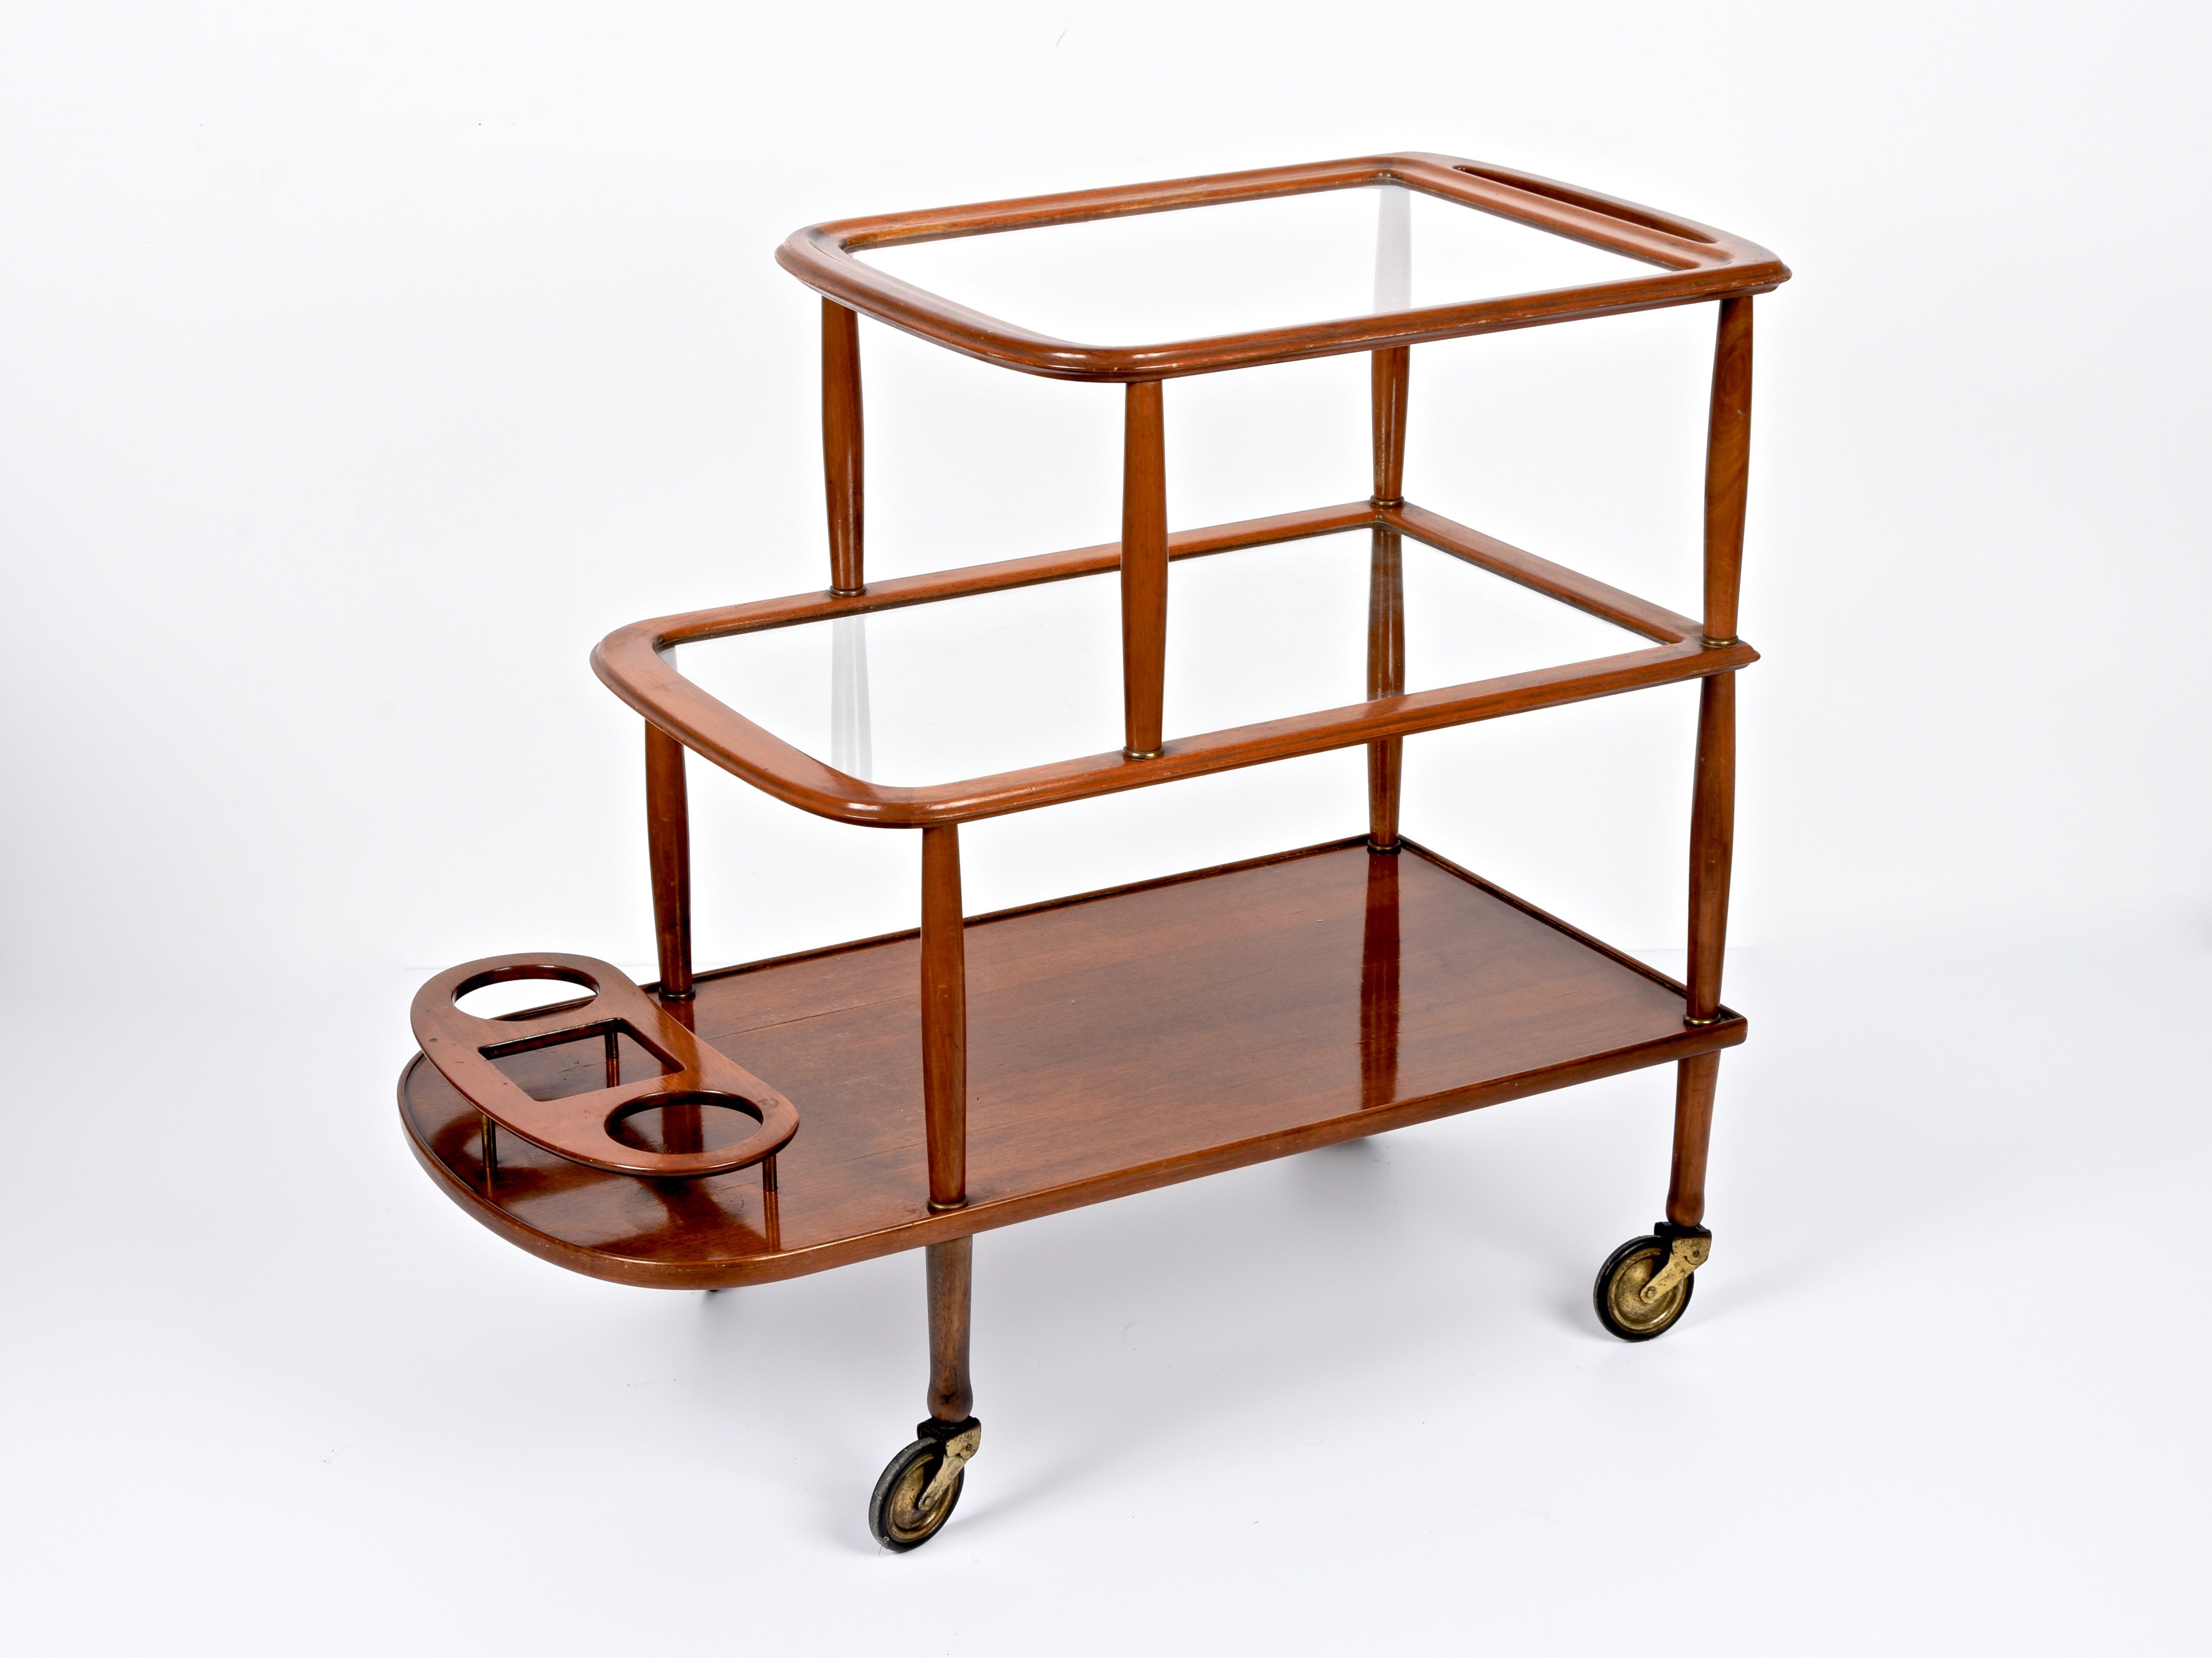 Fantastic midcentury bar trolley in white walnut (Junglans Regia) with bottle holder. This extraordinary piece is attributed to Cesare Lacca and was designed in Italy during the 1950s.

This wonderful piece is equipped with an ergonomic bottle